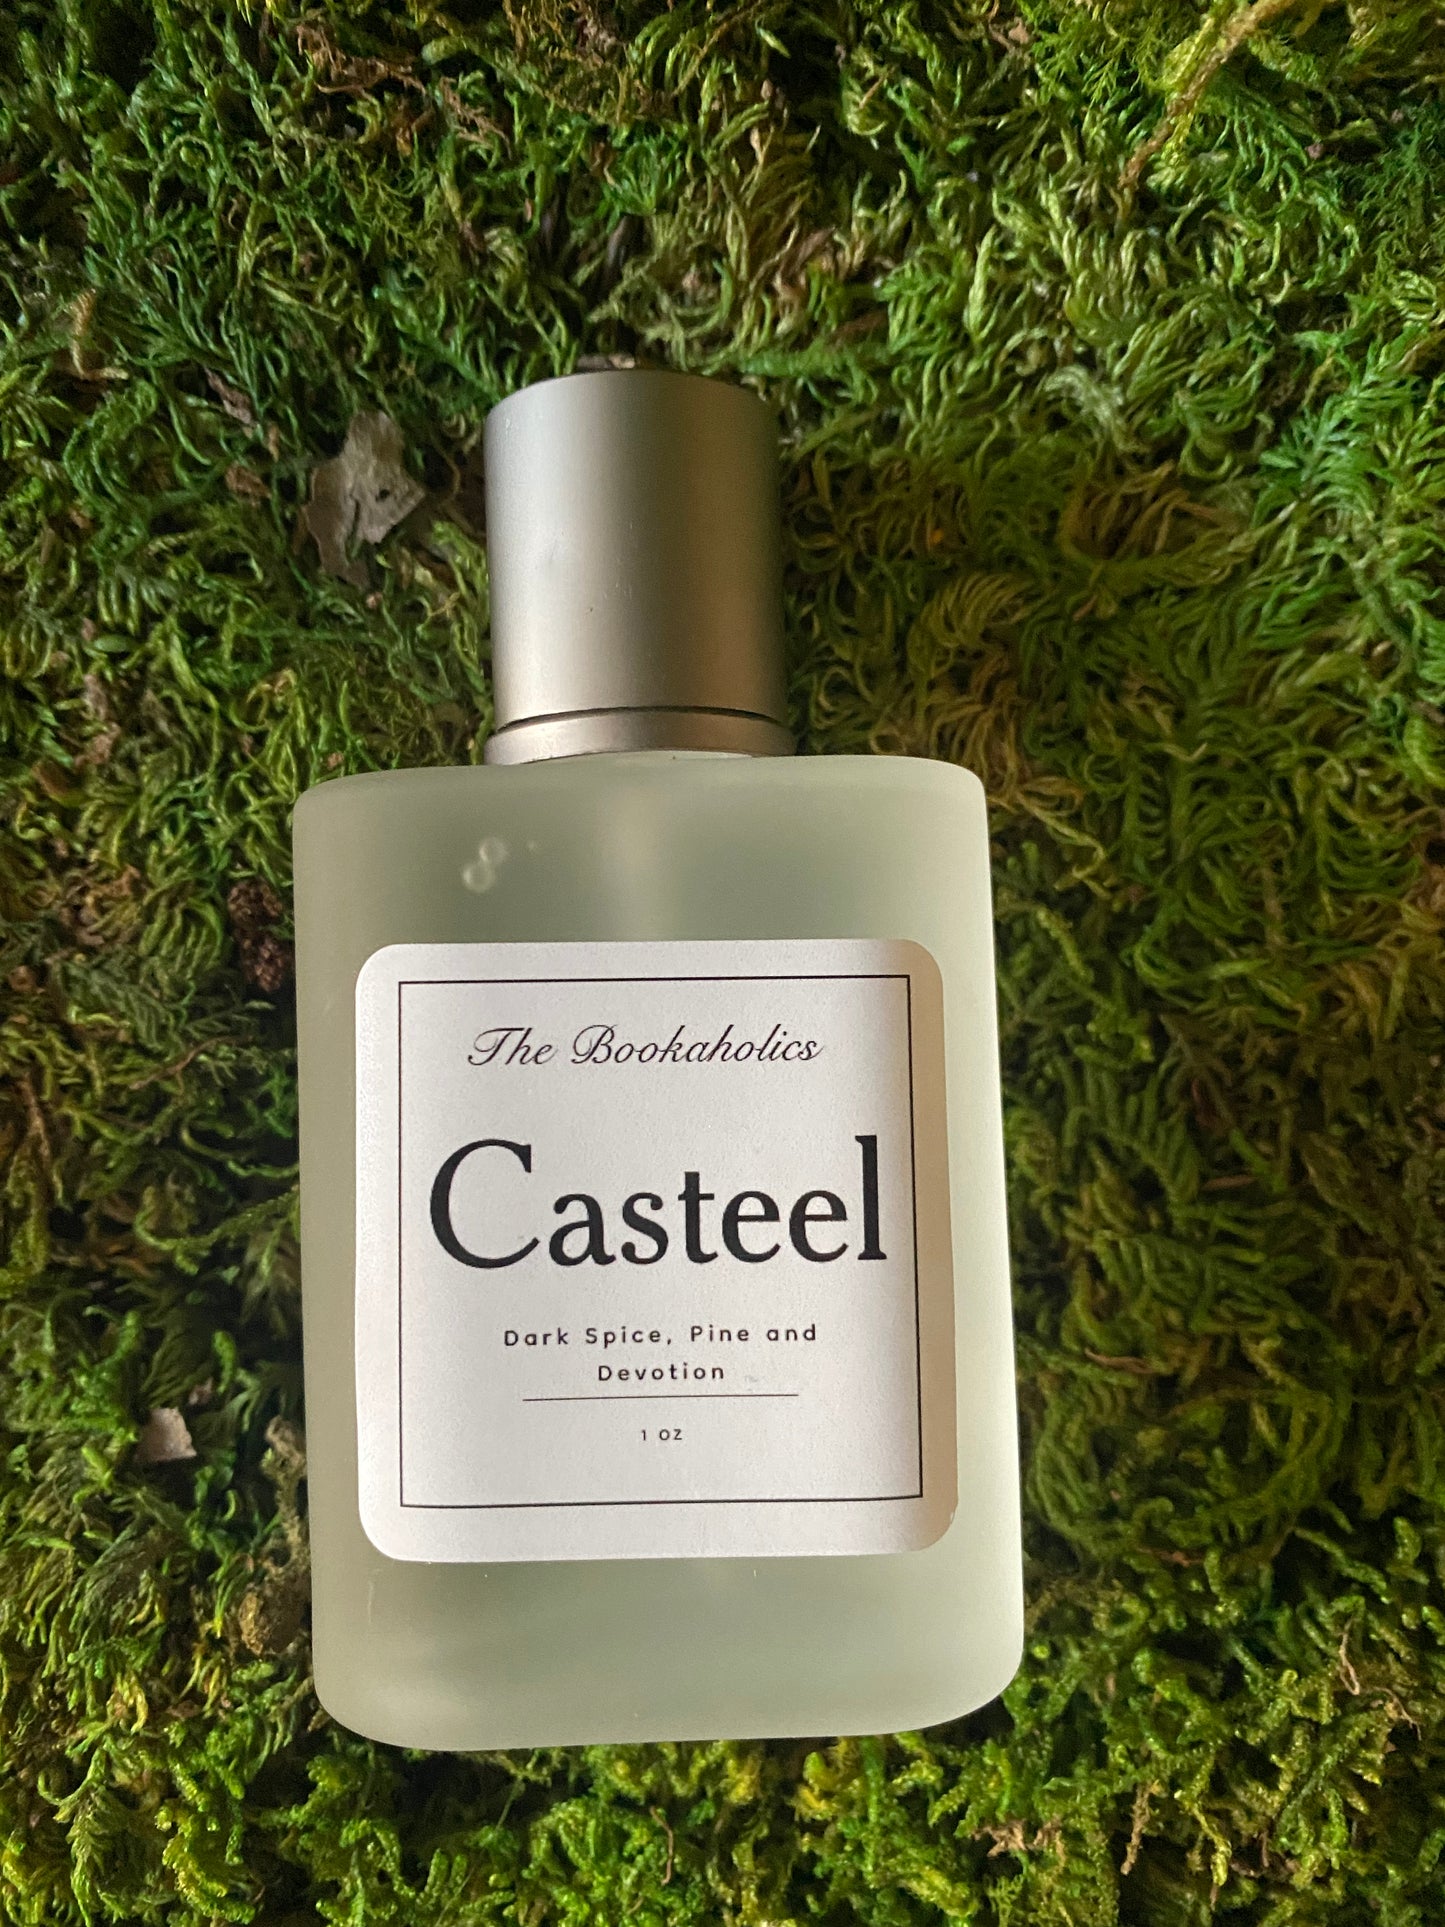 Casteel: Cologne inspired by From Blood and Ash